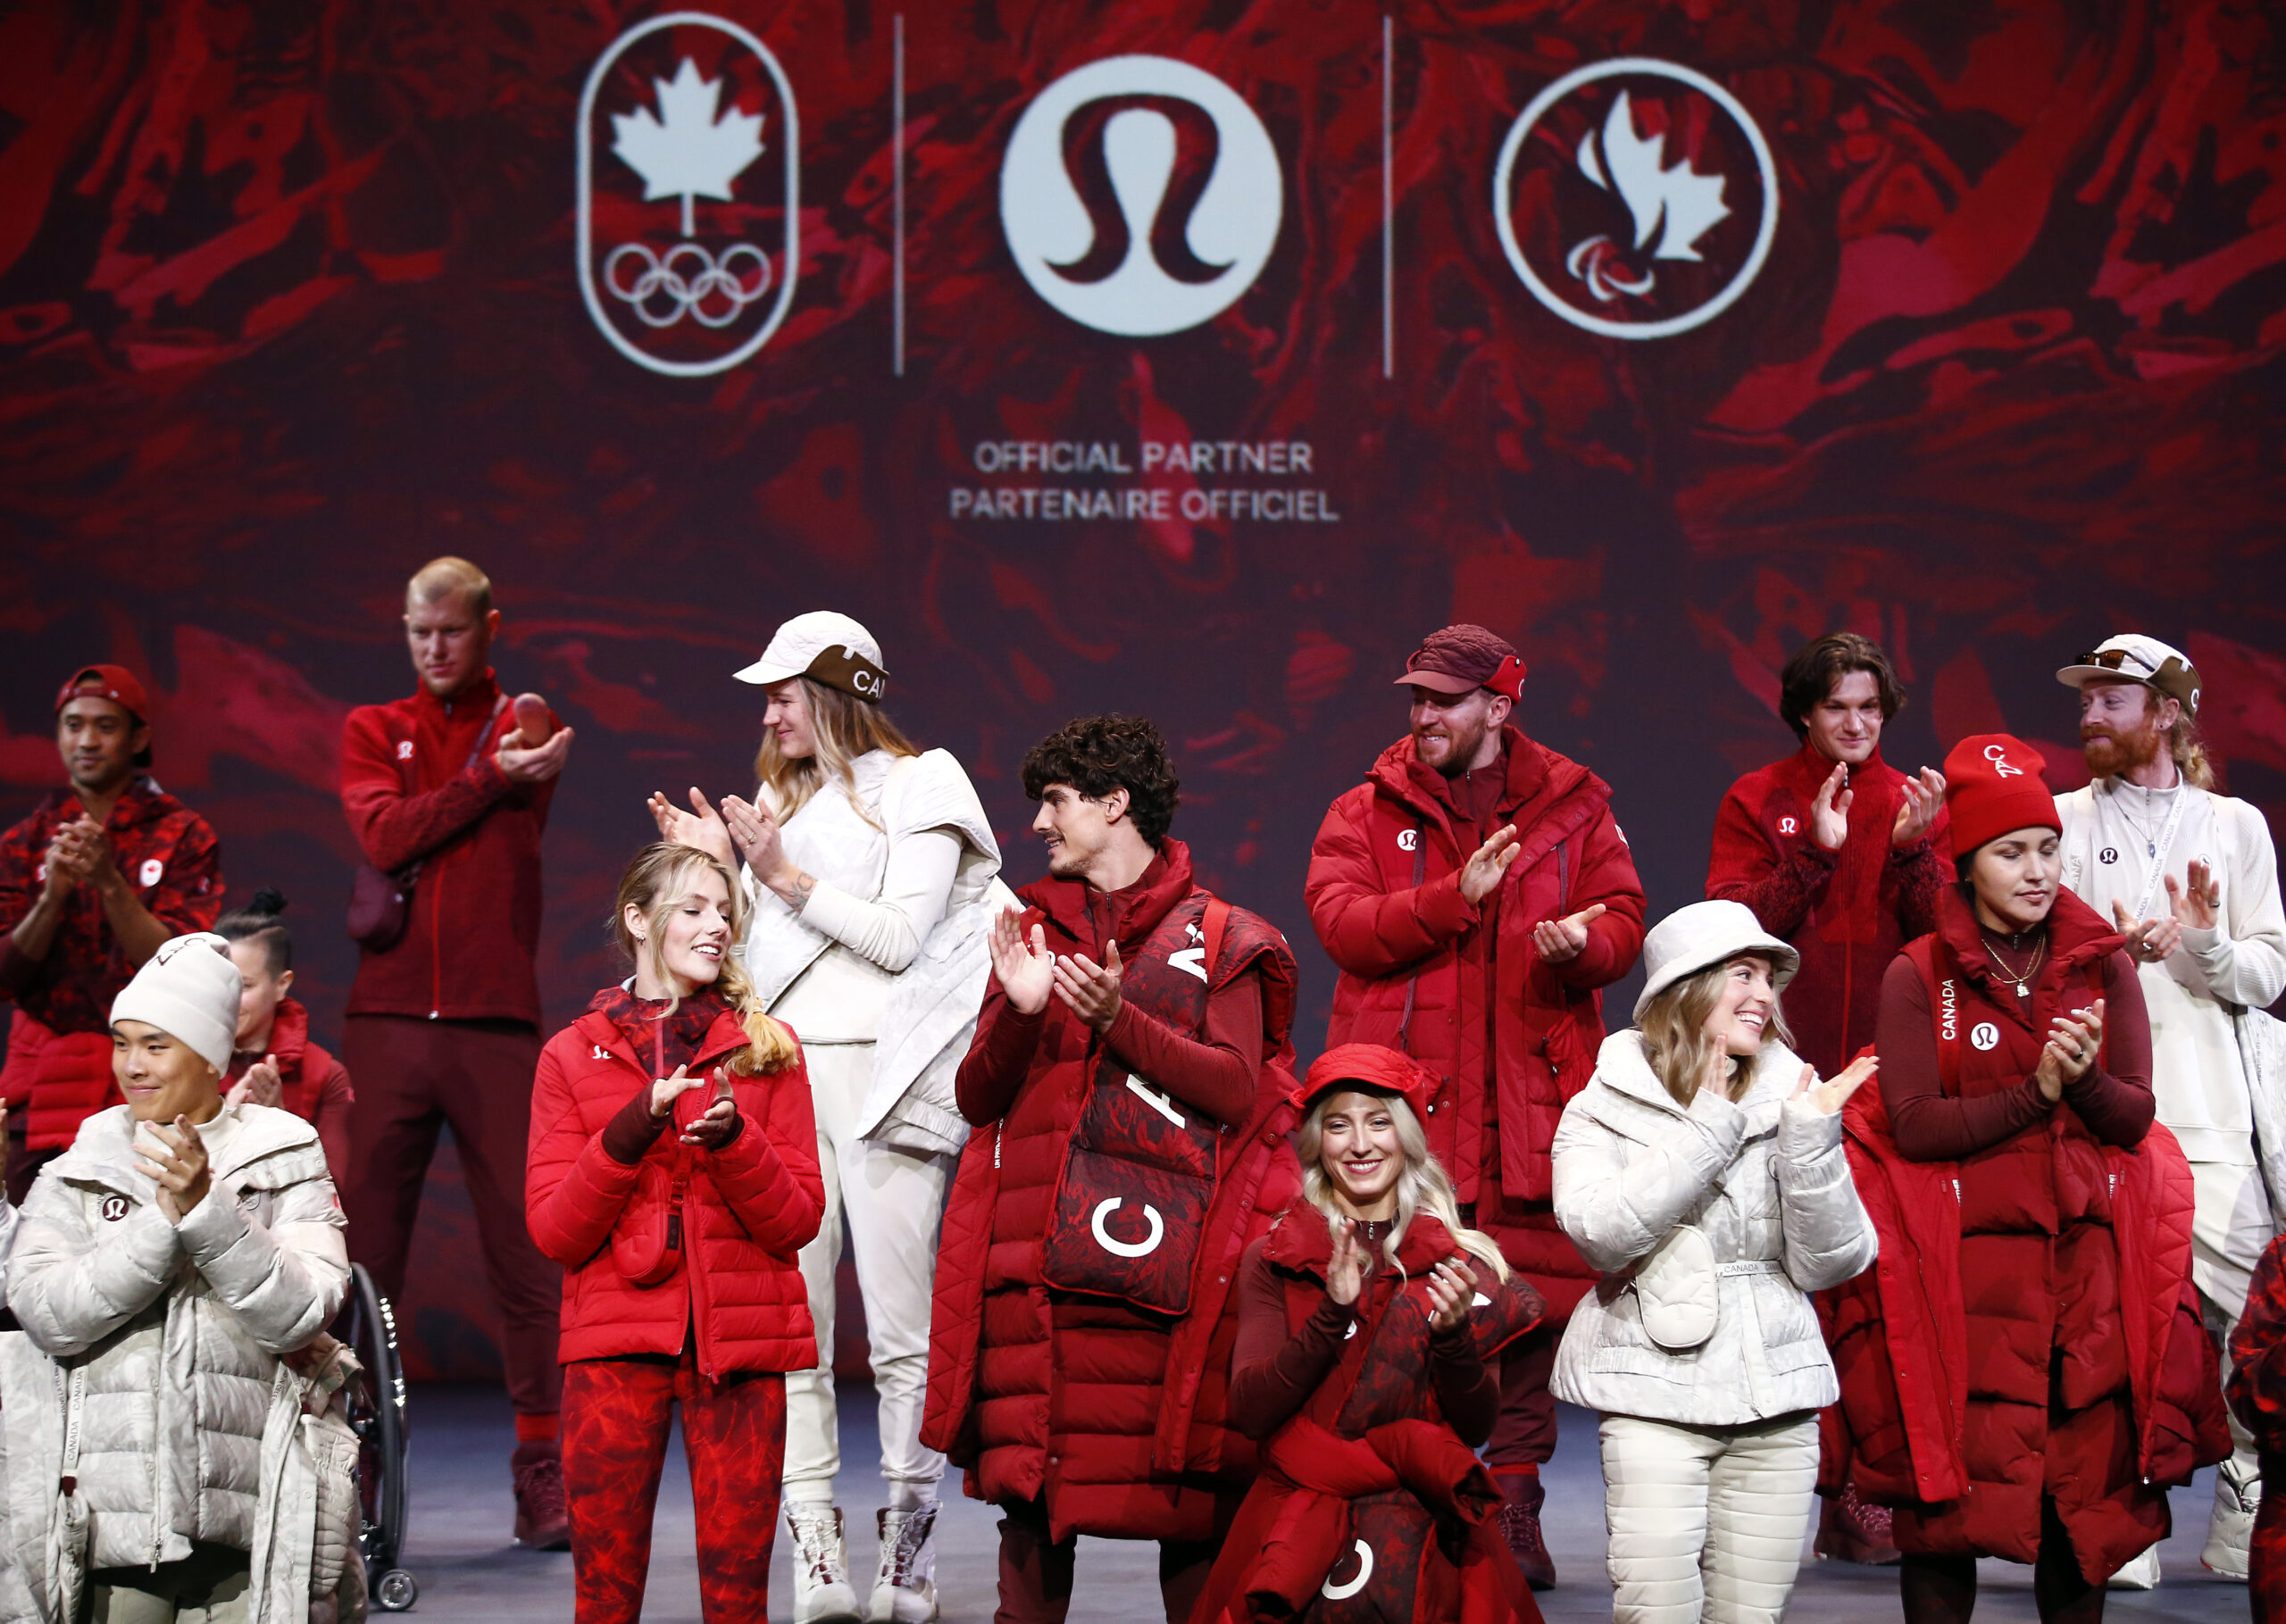 Lululemon Officially Launches The Olympic and Paralympic Athlete